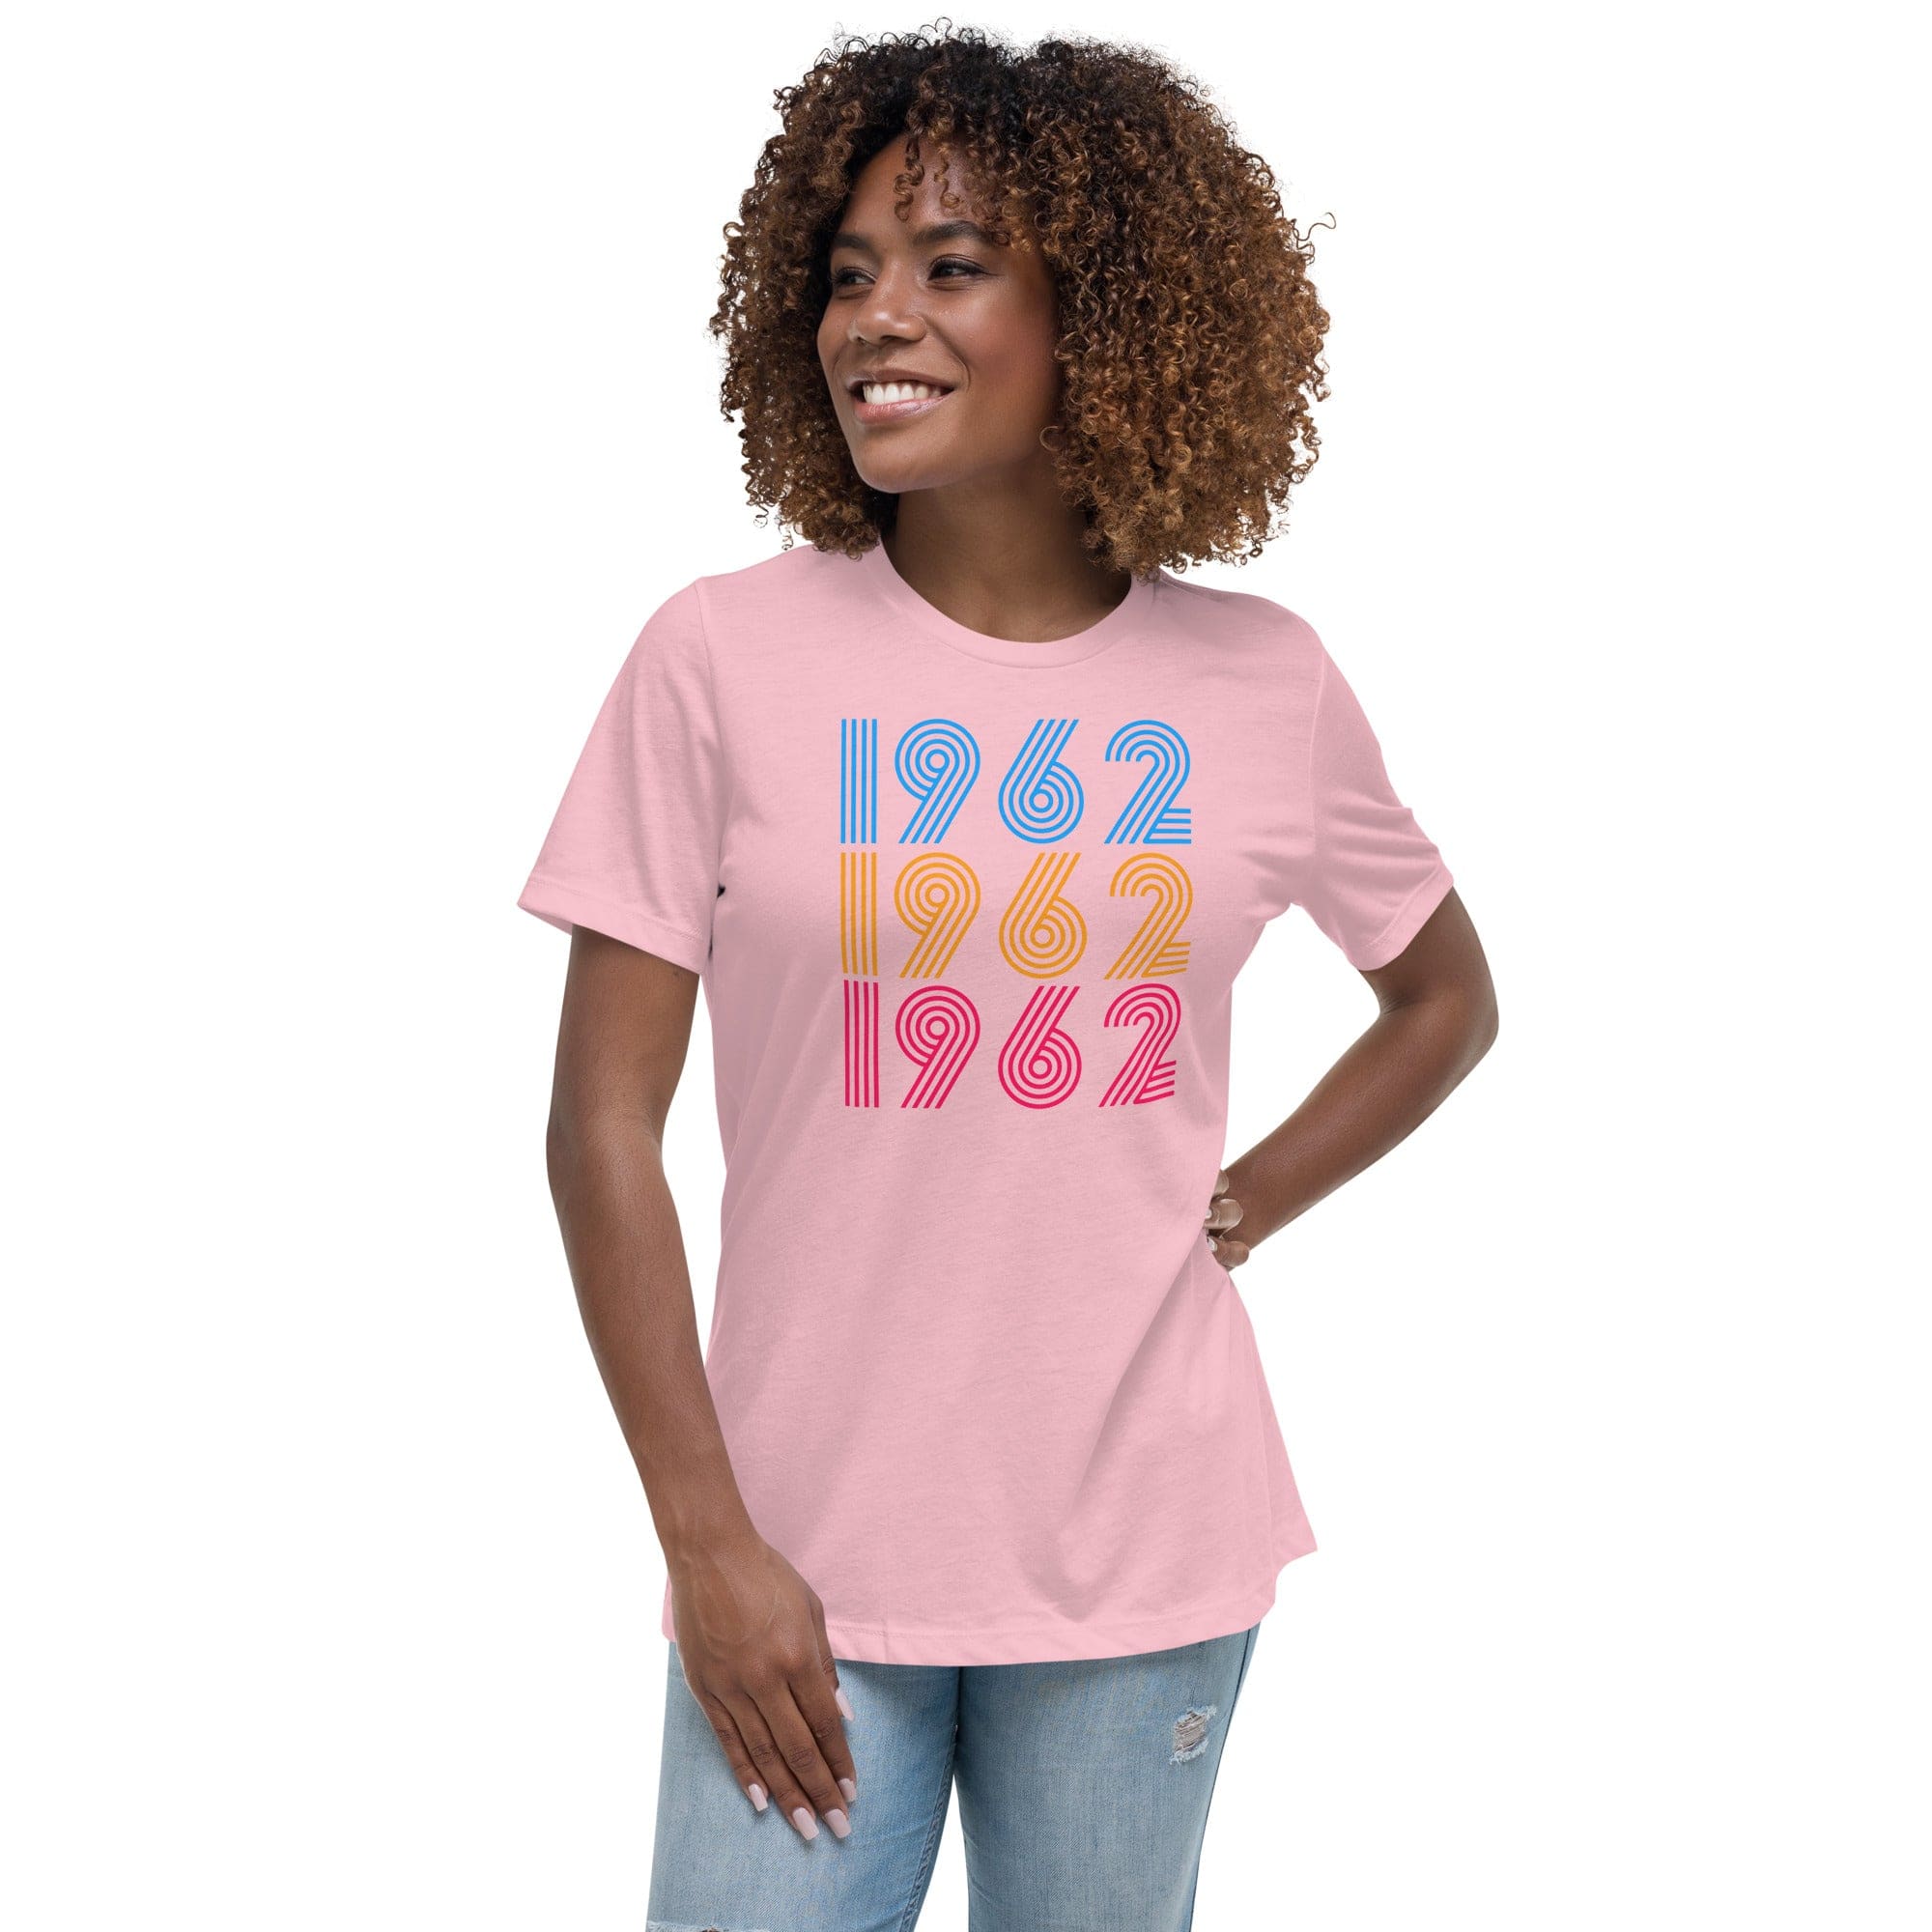 Spruced Roost Women's Clothing Pink / S Vintage 1962 60th Birthday - Celebrate - Happy Birthday -  S-3X